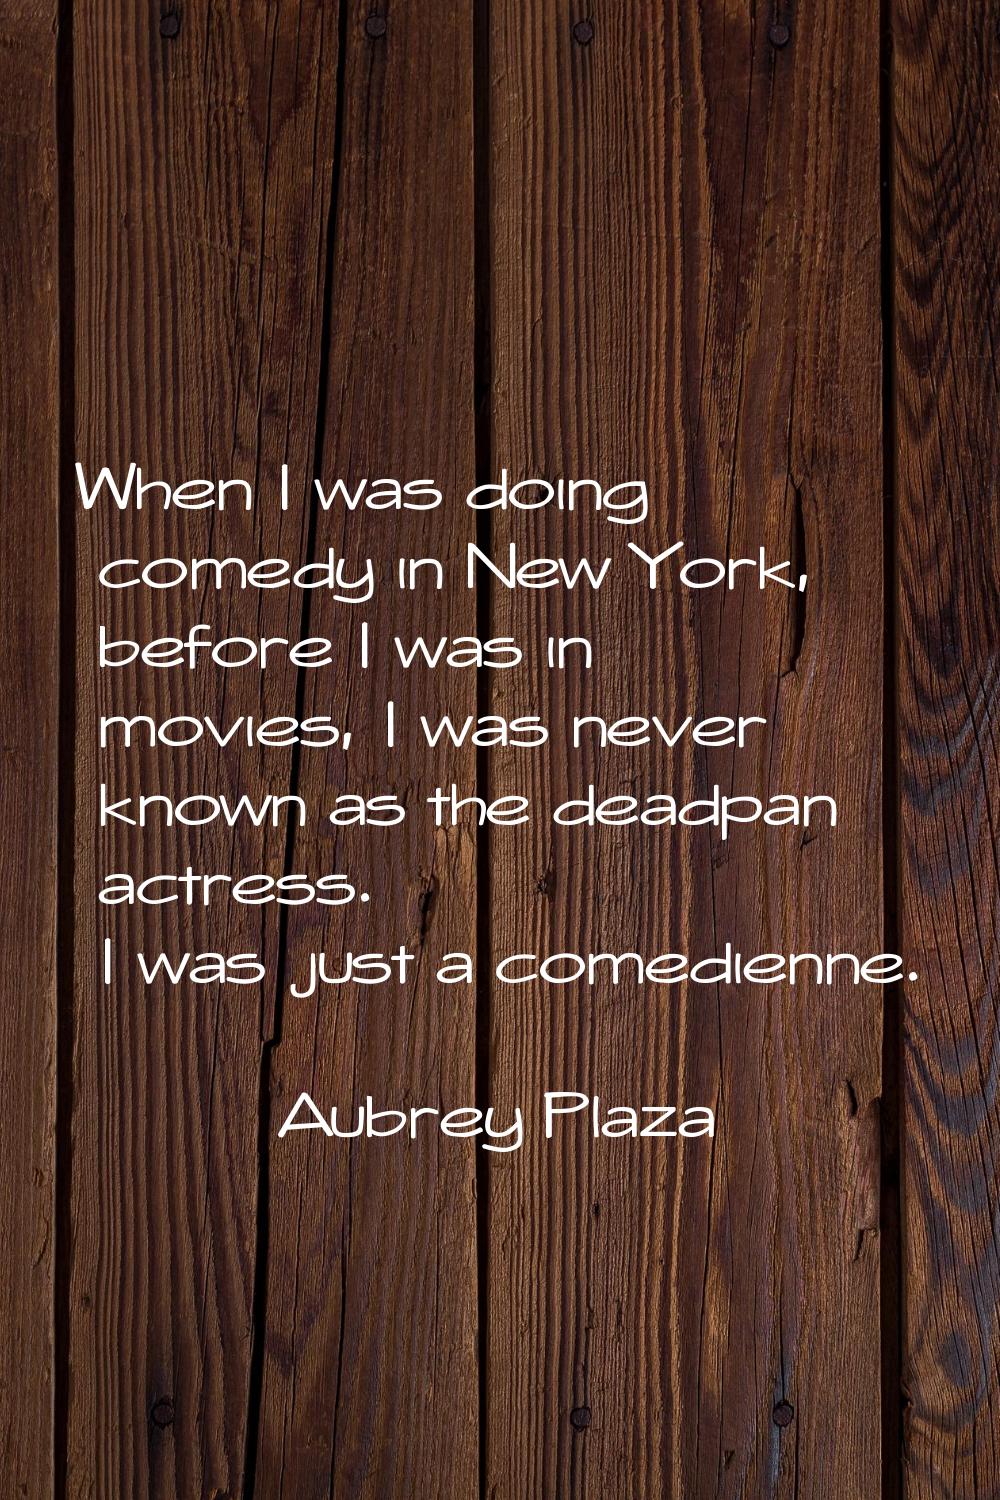 When I was doing comedy in New York, before I was in movies, I was never known as the deadpan actre